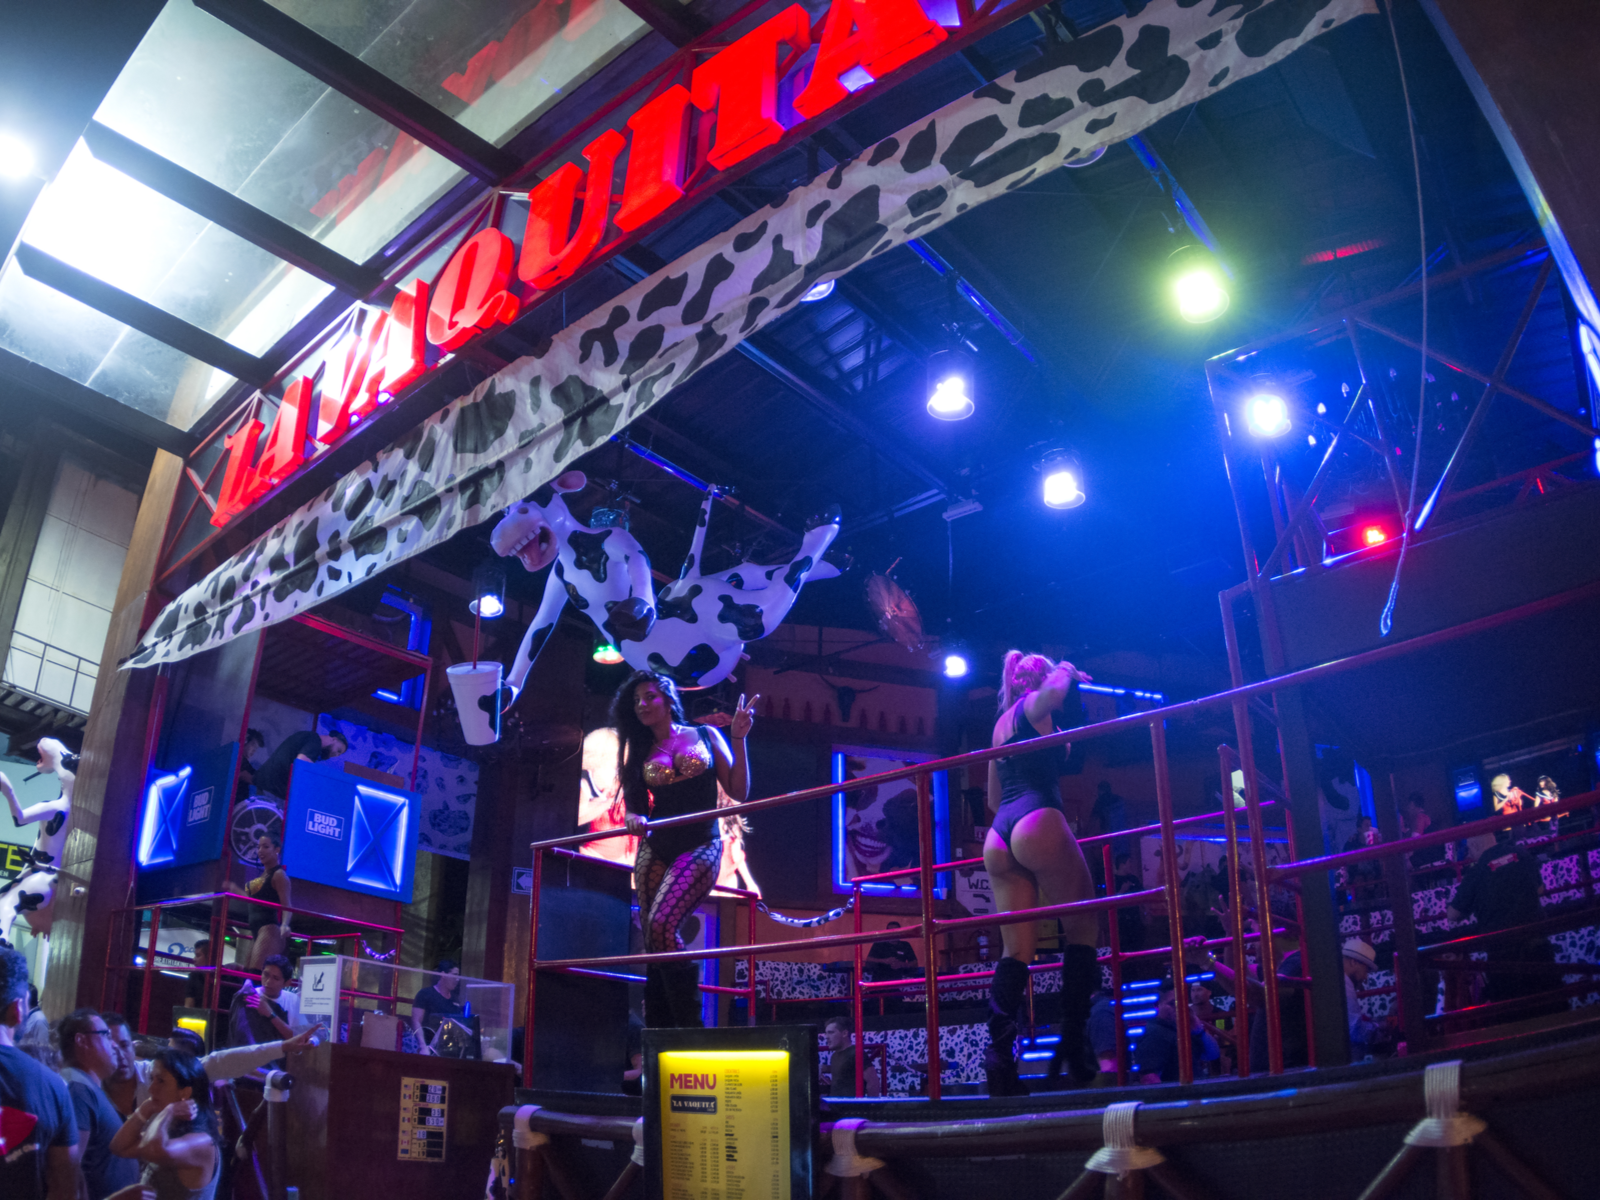 Dancers entertaining customers on a platform at La Vaquita, listed as one of the best clubs in Cancun, in erotic one piece, fishnet stockings, and high-heeled boots